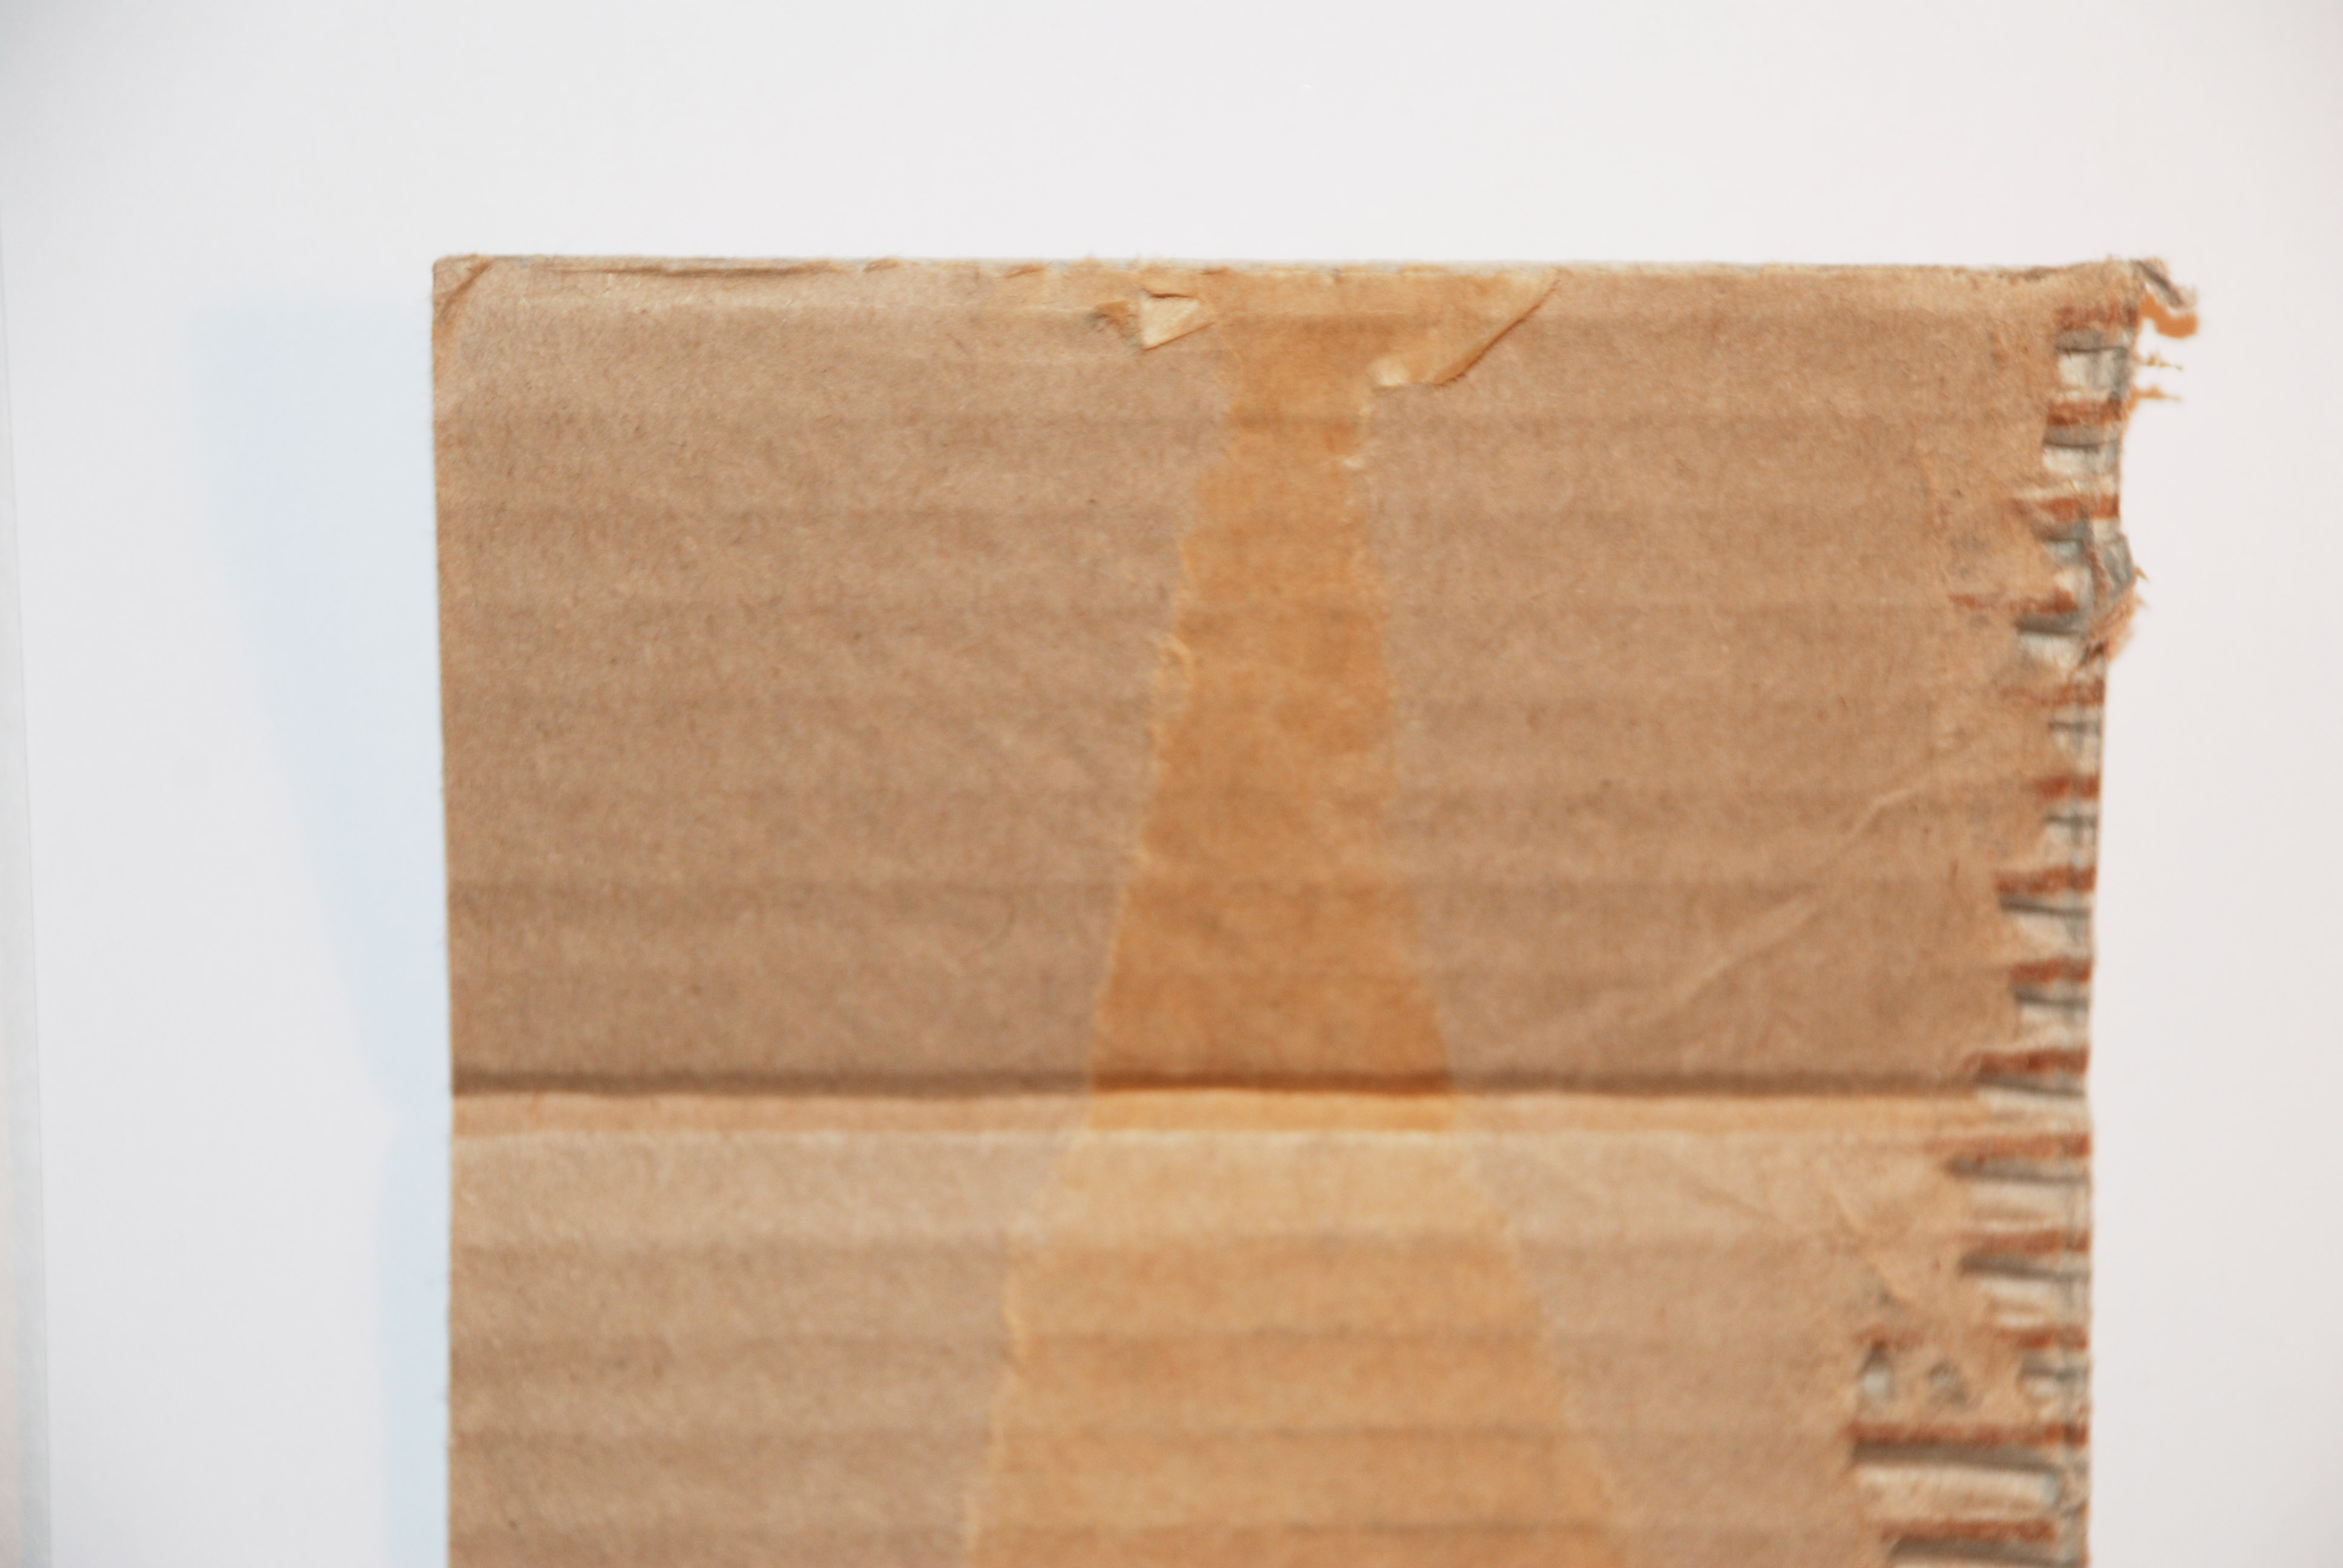 Free High Res Textures, Cardboard Textures | Sycha Web Design ...